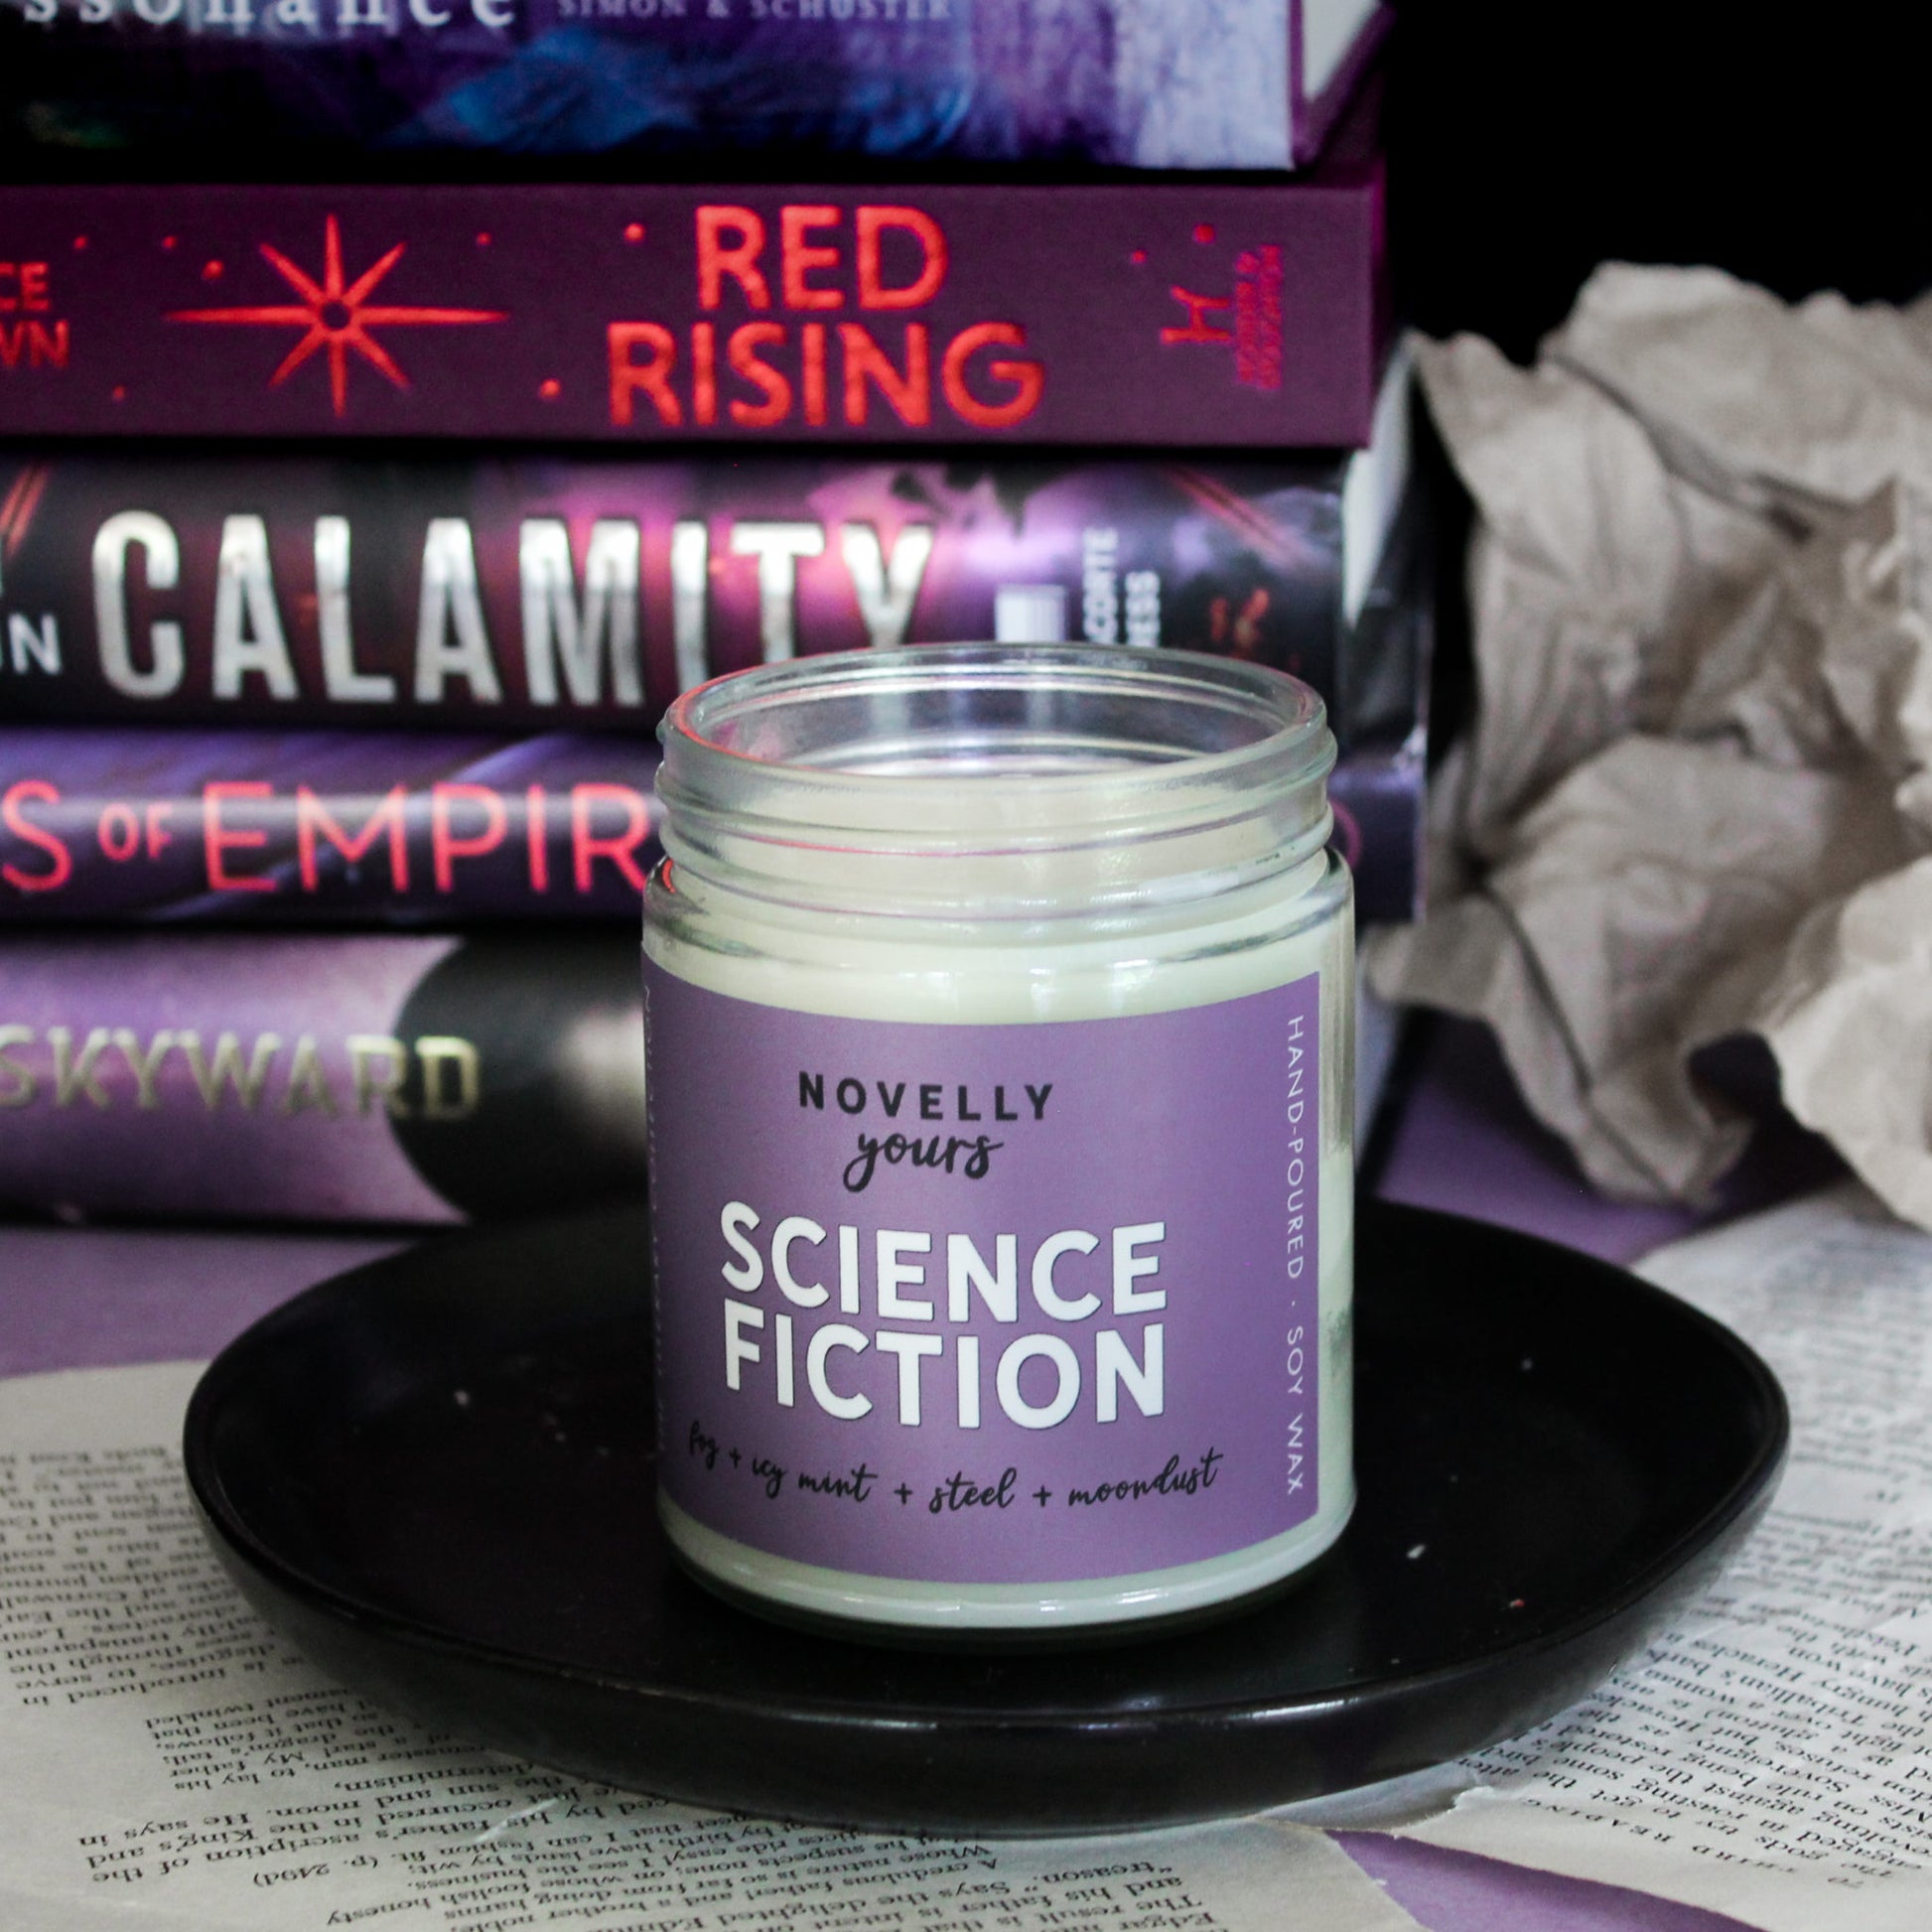 scented soy wax candle labeled "Science Fiction" sitting on on a black saucer in front of a stack of sci-fi books